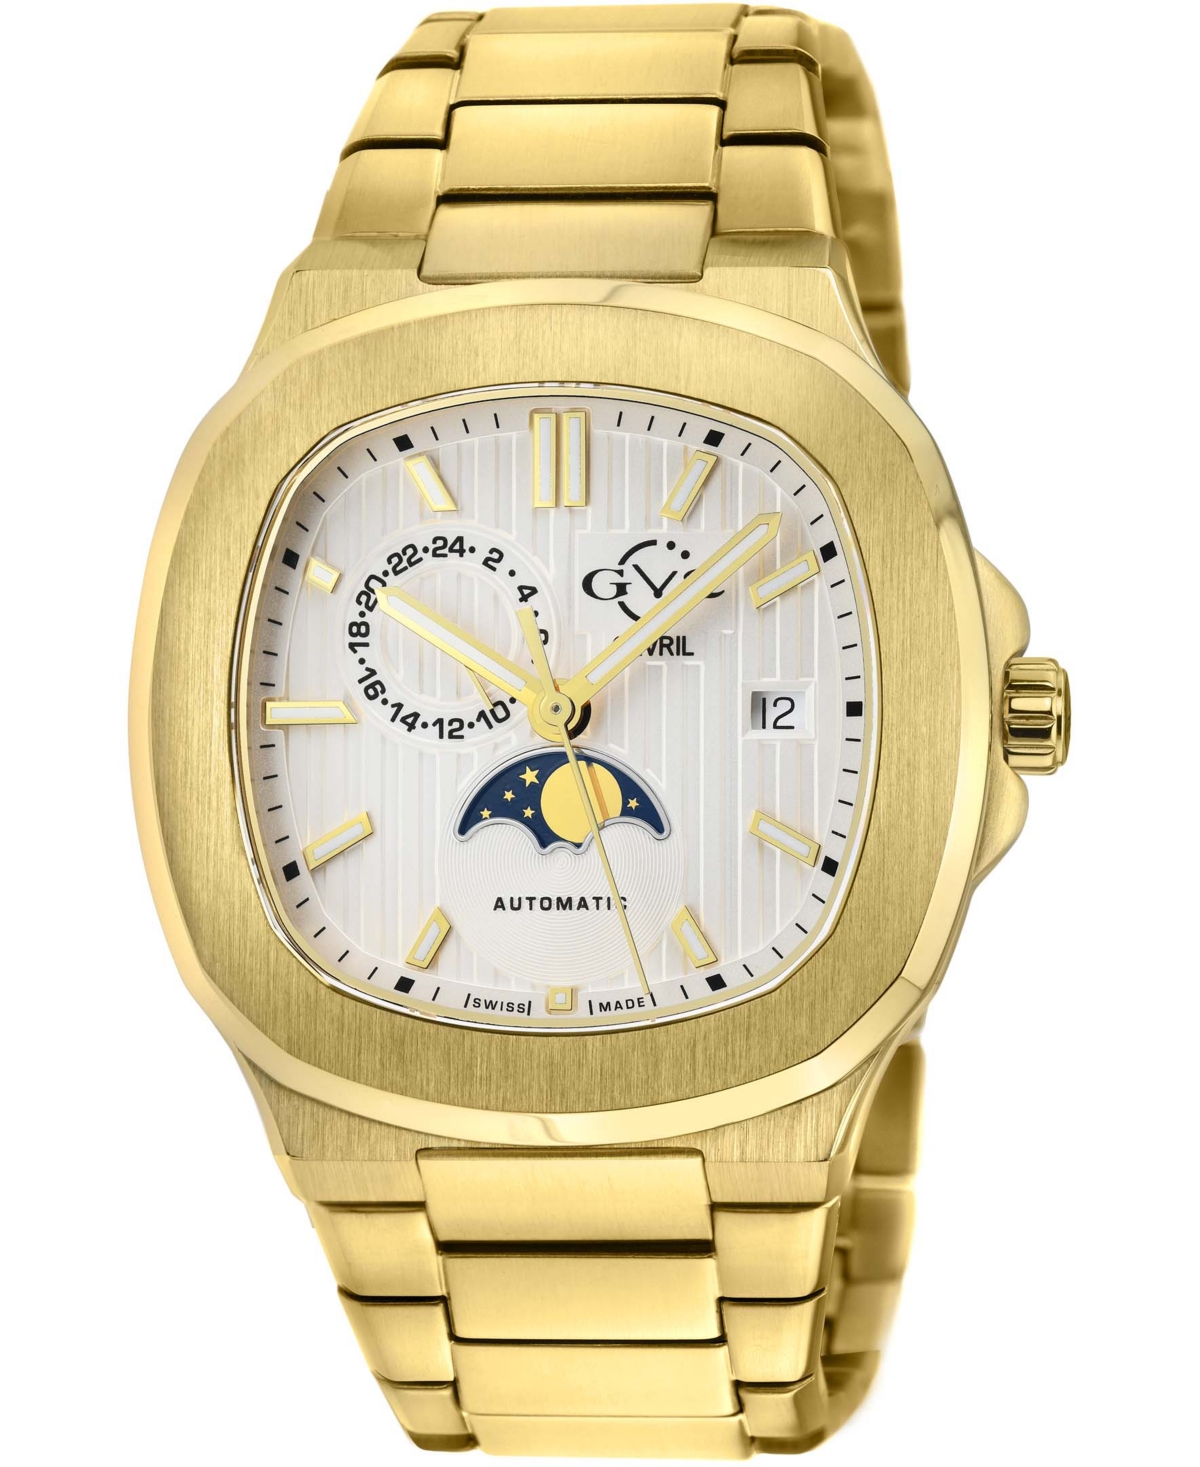 Gv2 By Gevril Men's Potente Swiss Automatic Gold-tone Stainless Steel Watch 40mm